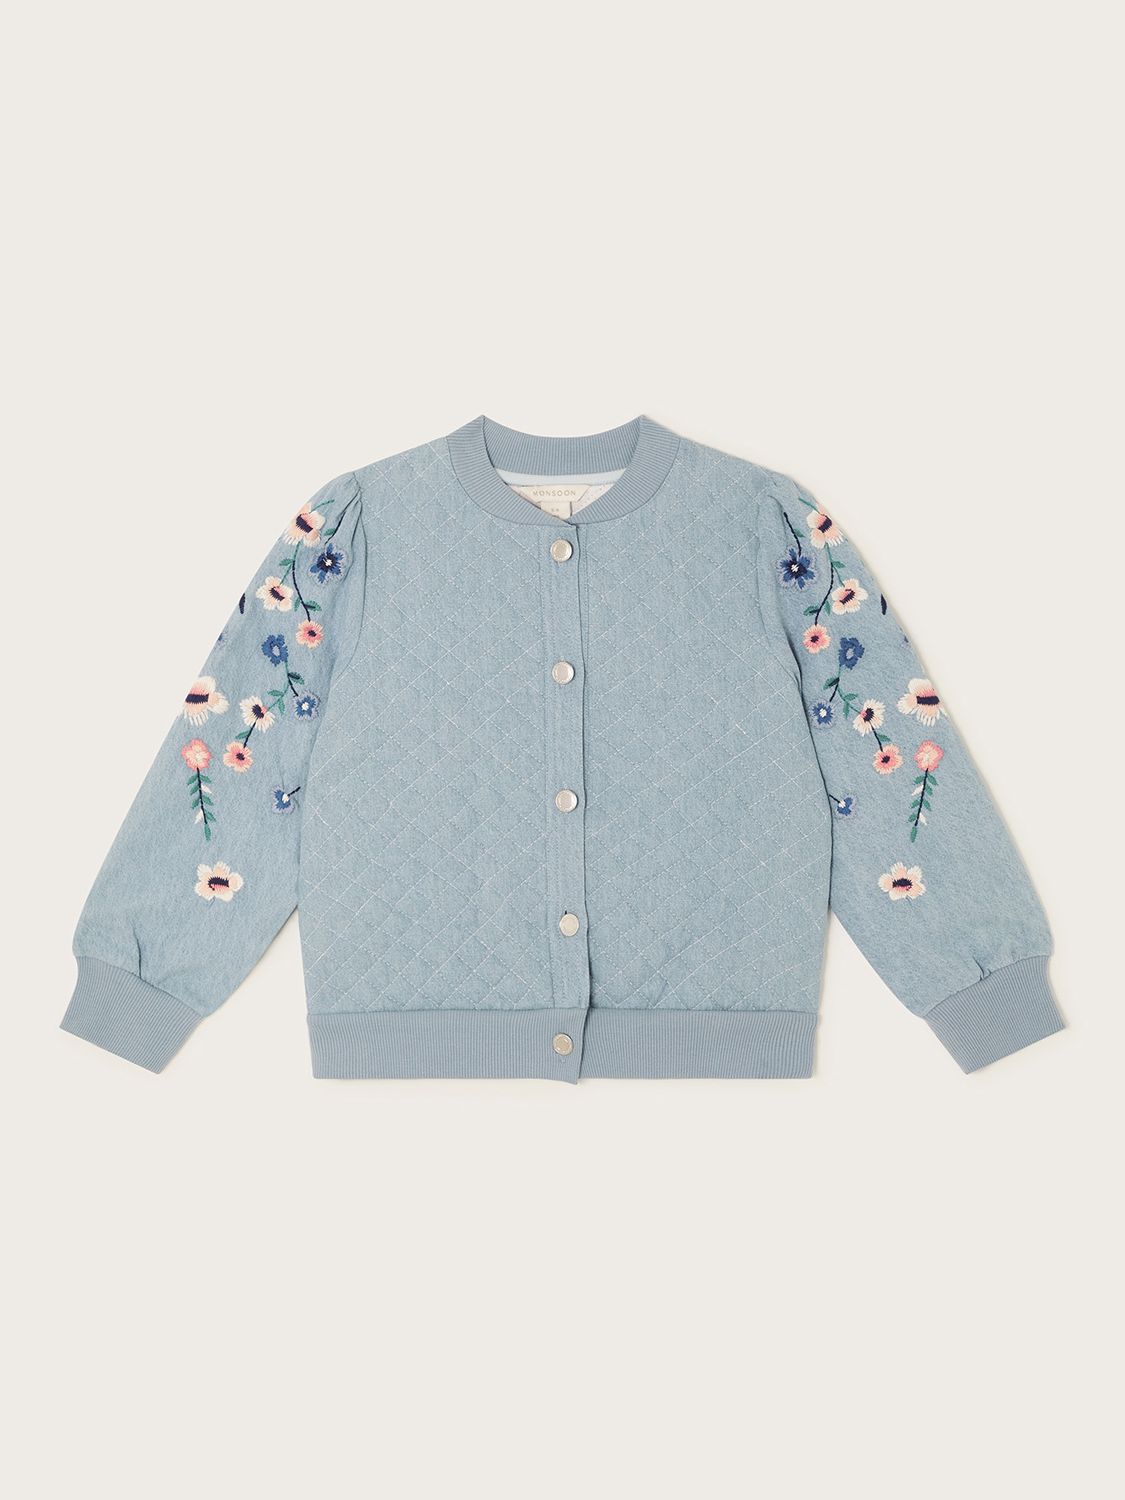 Monsoon Kids' Chambray Floral Embroidered Bomber Jacket, Blue, 3-4 years